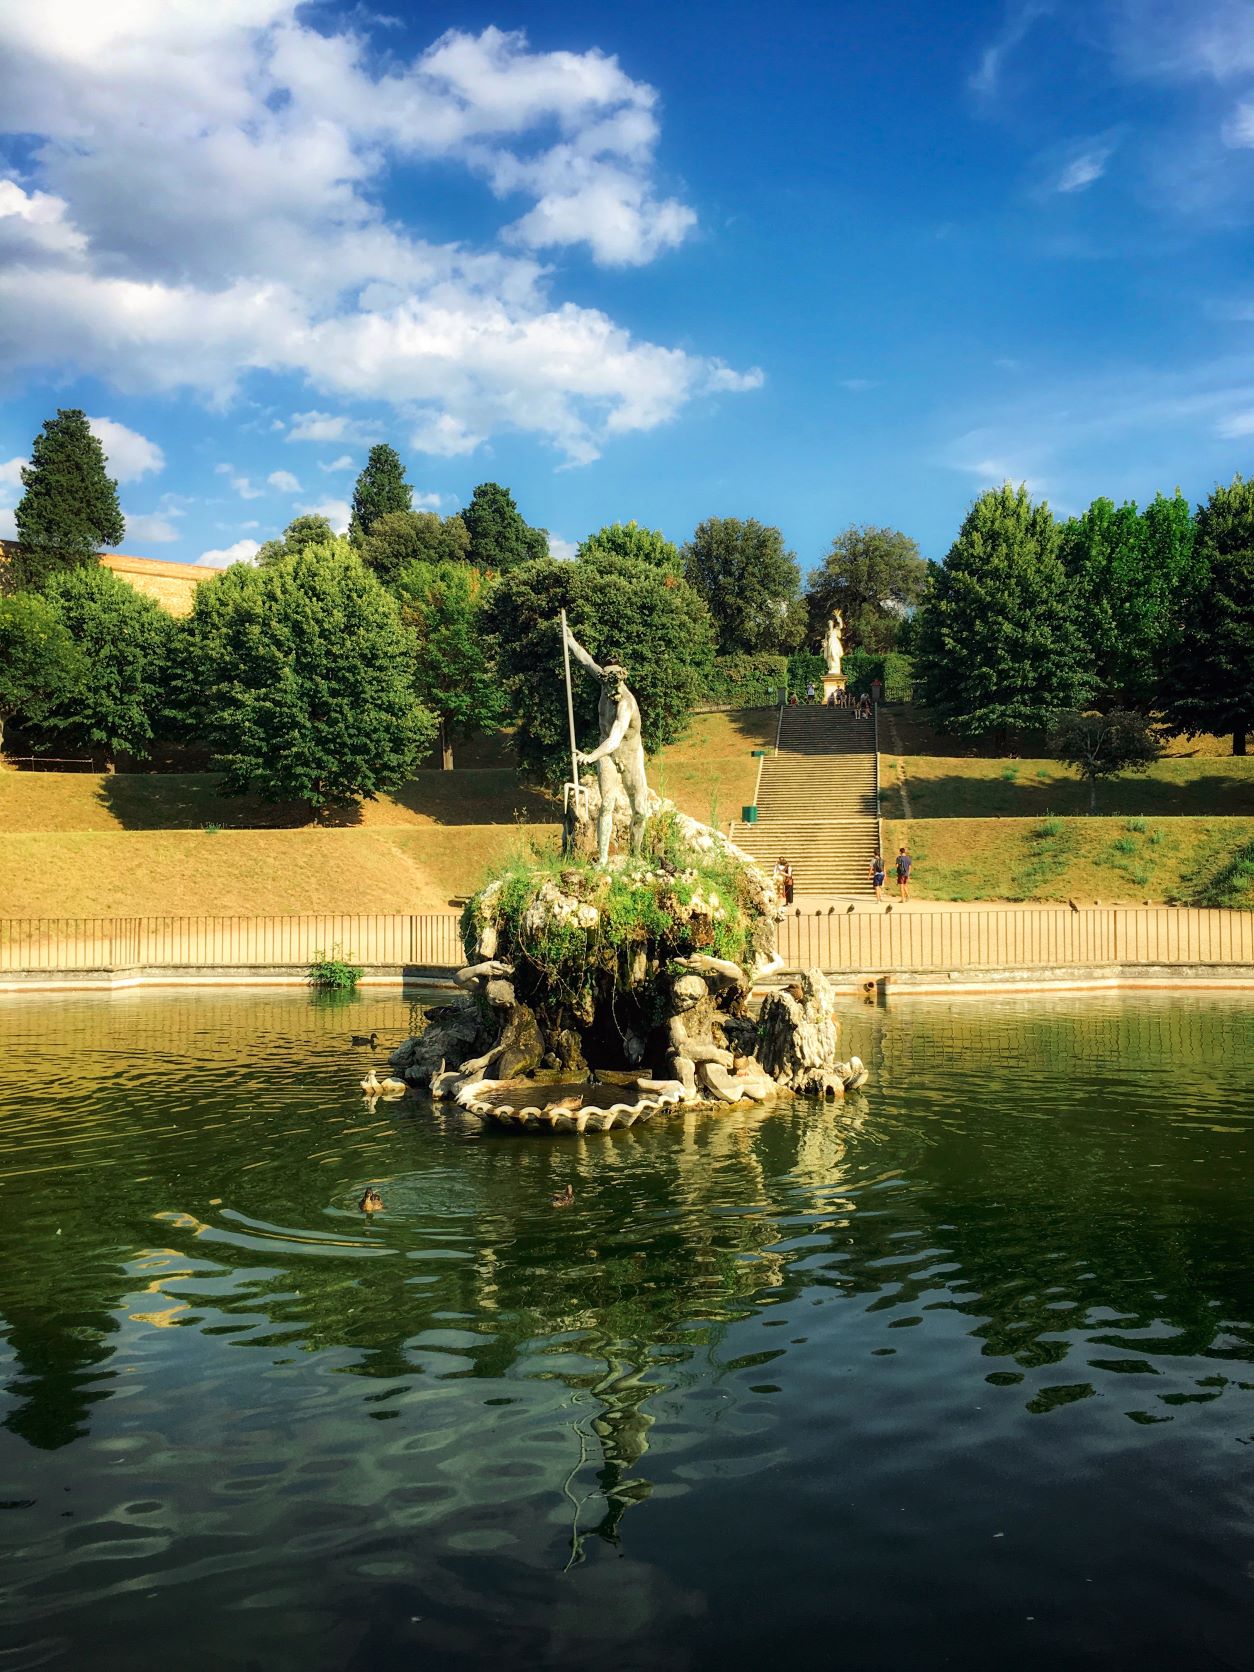 18 Things to Do in Florence - The King's Travel